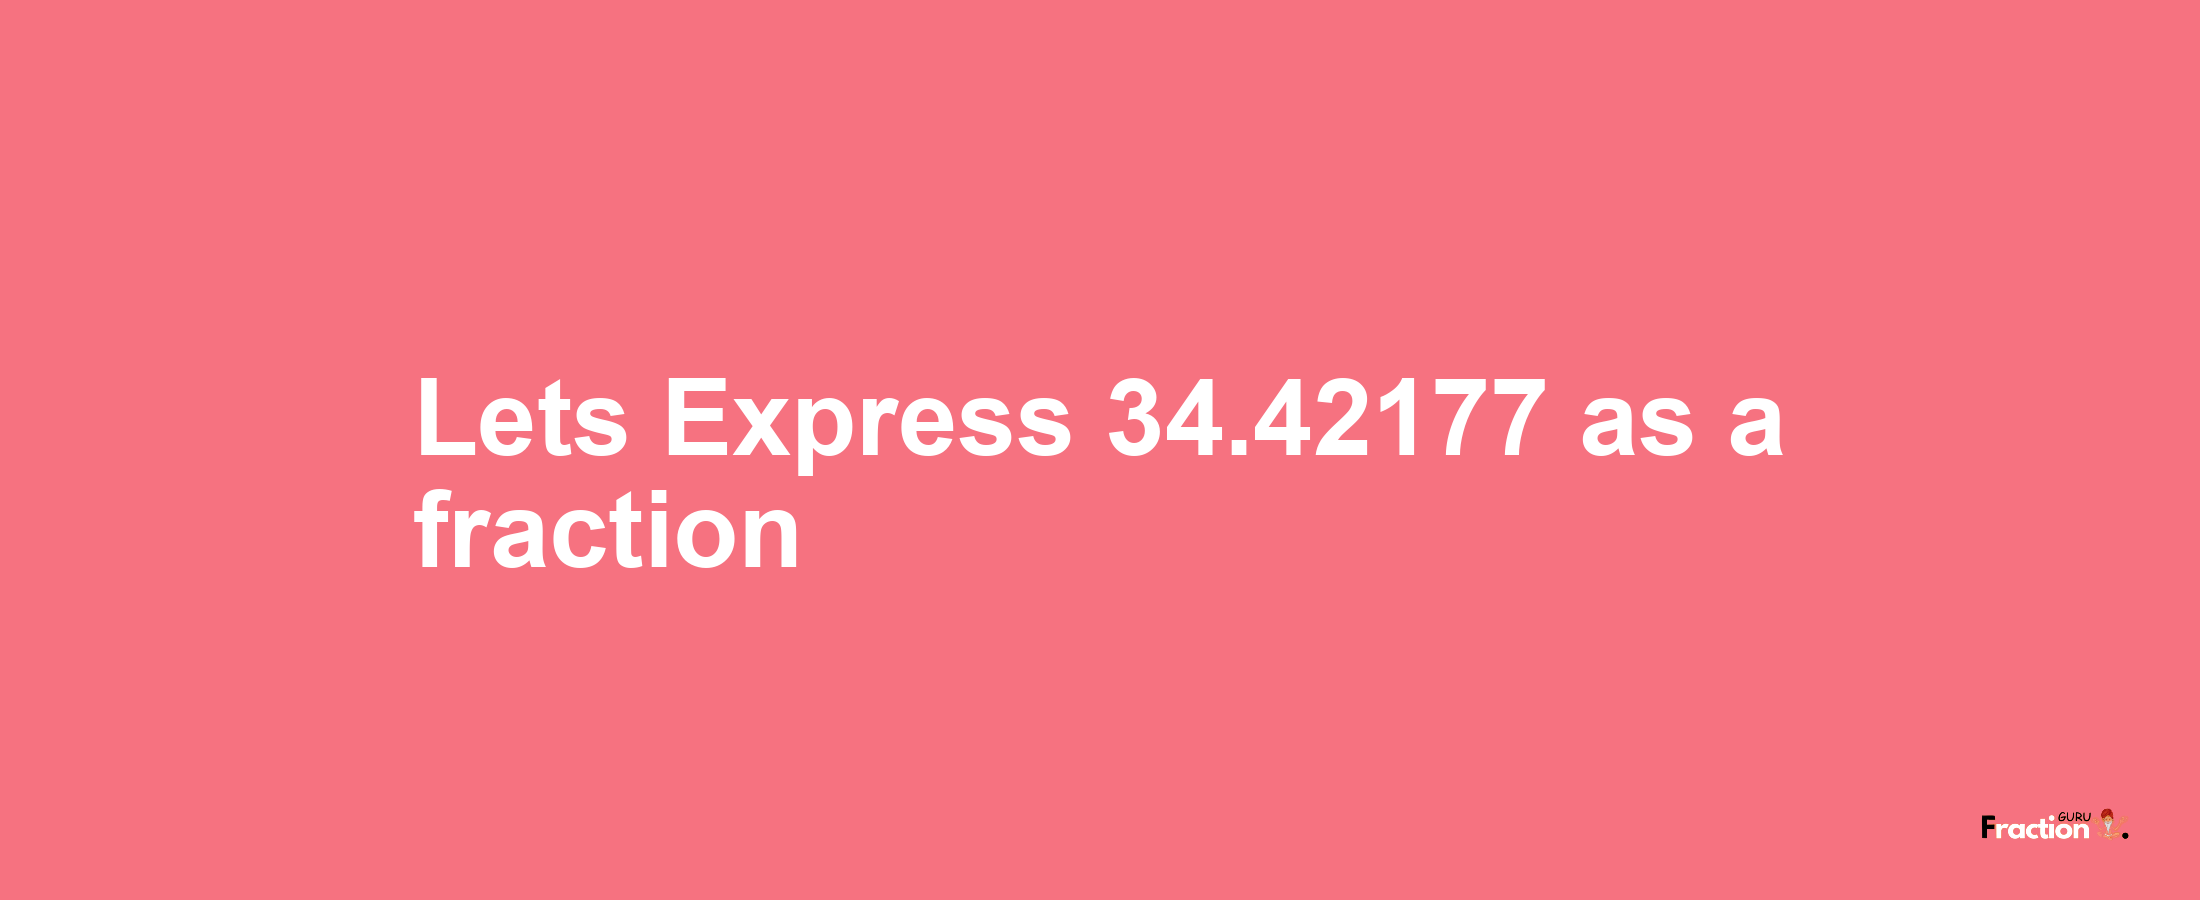 Lets Express 34.42177 as afraction